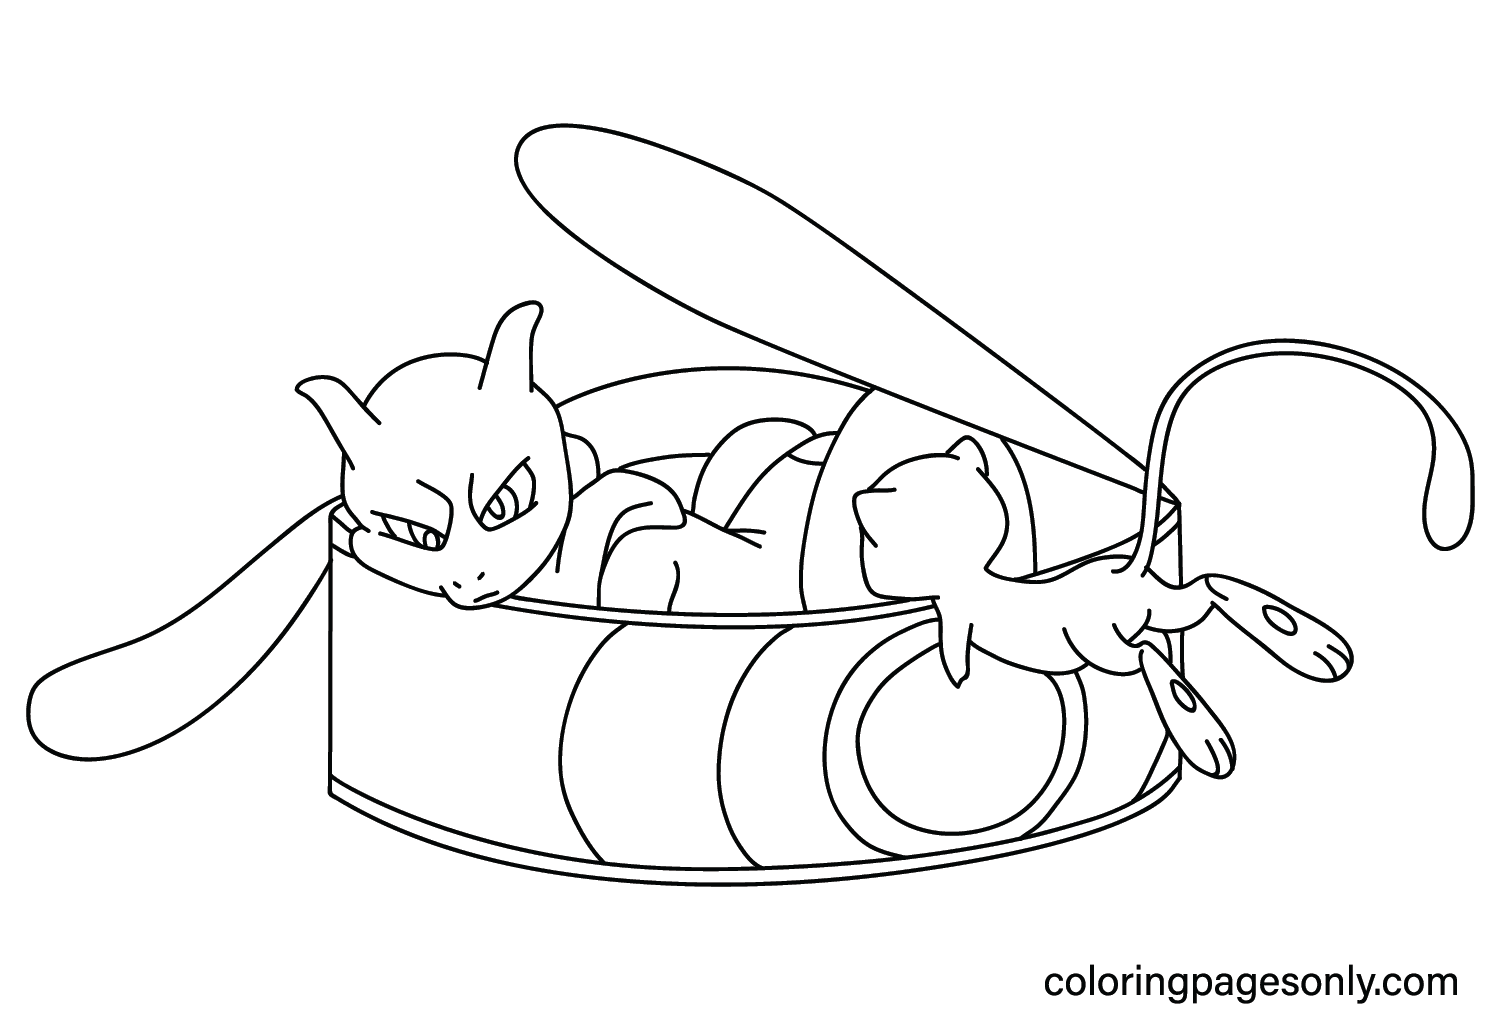 Mewtwo and Mew Coloring Page PDF from Mew